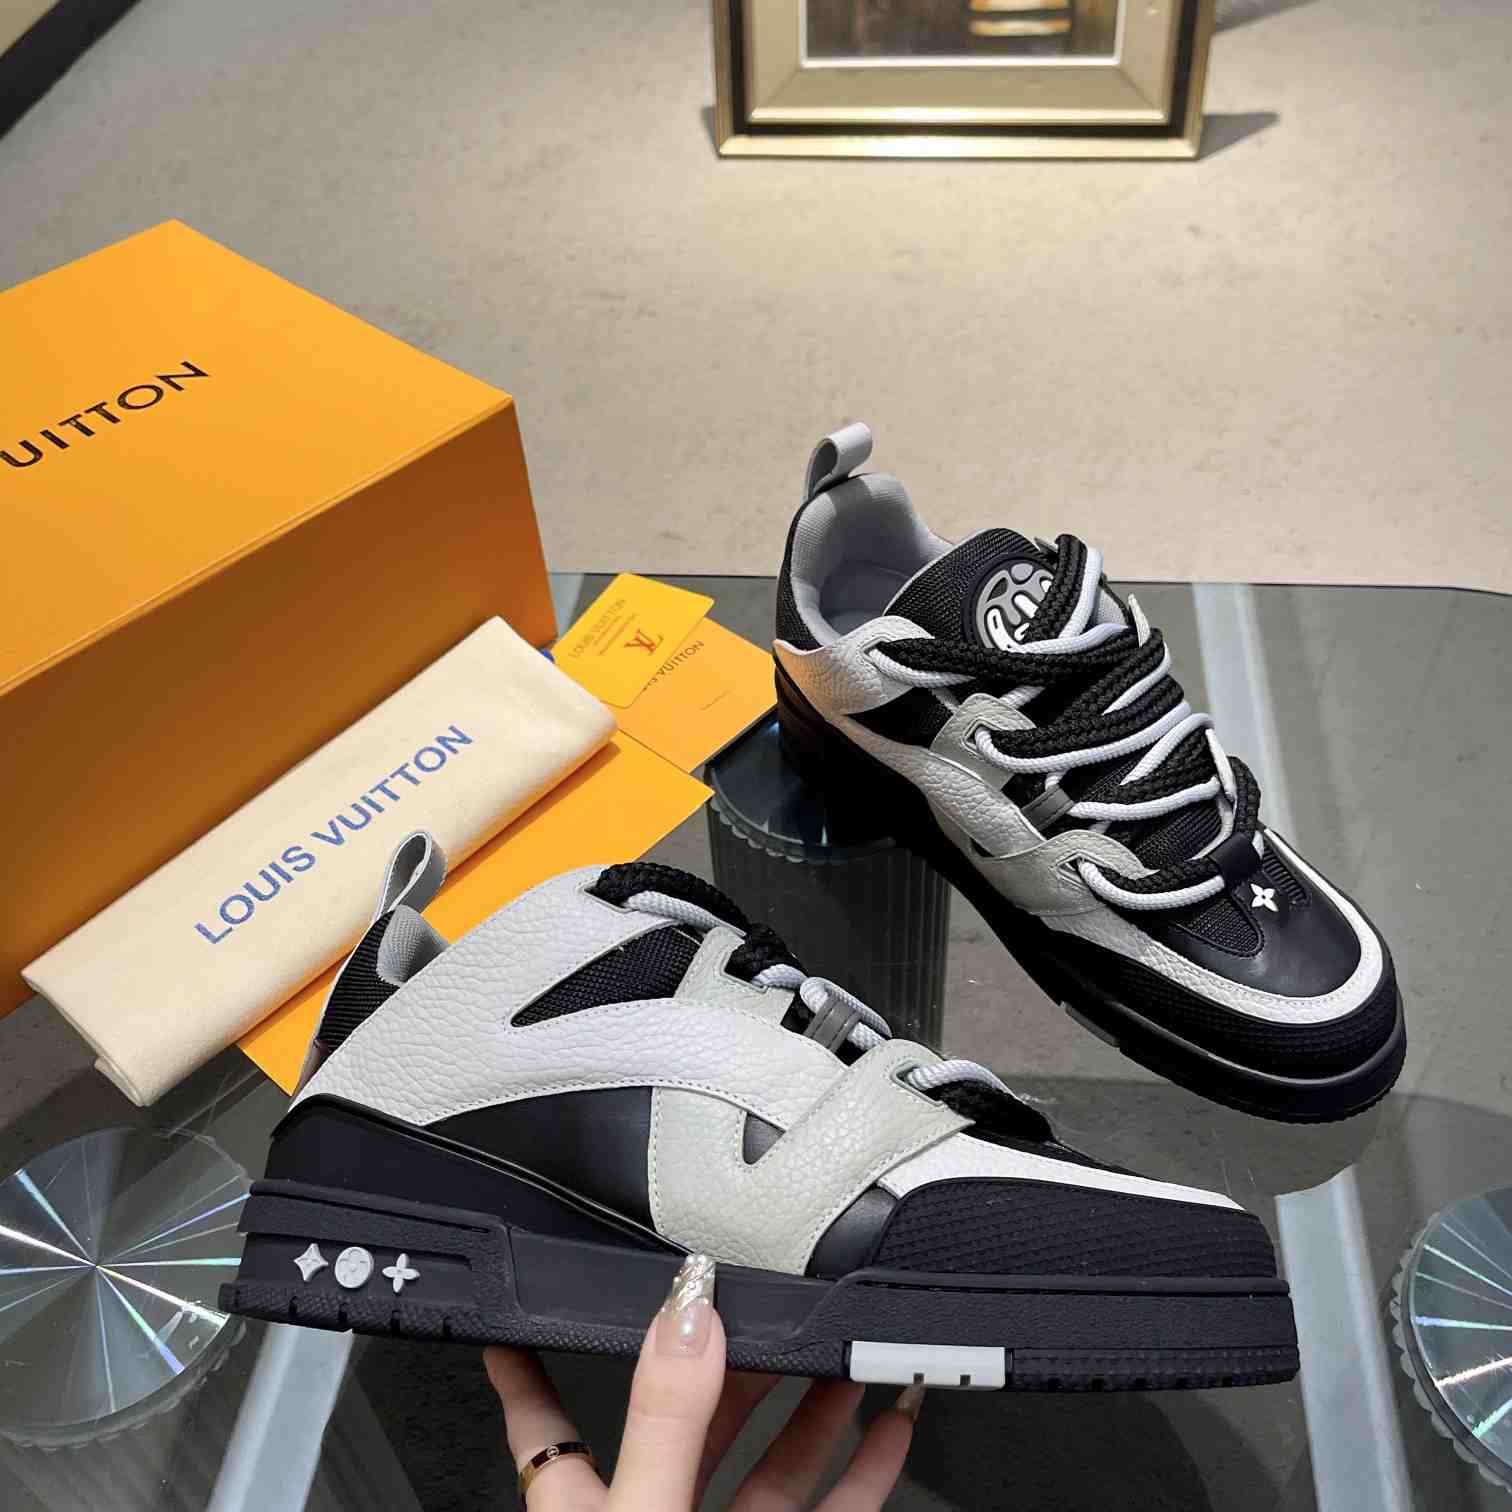 Louis Vuitton Skate Trainer Sneakers 'Anthracite', 1ABZ47